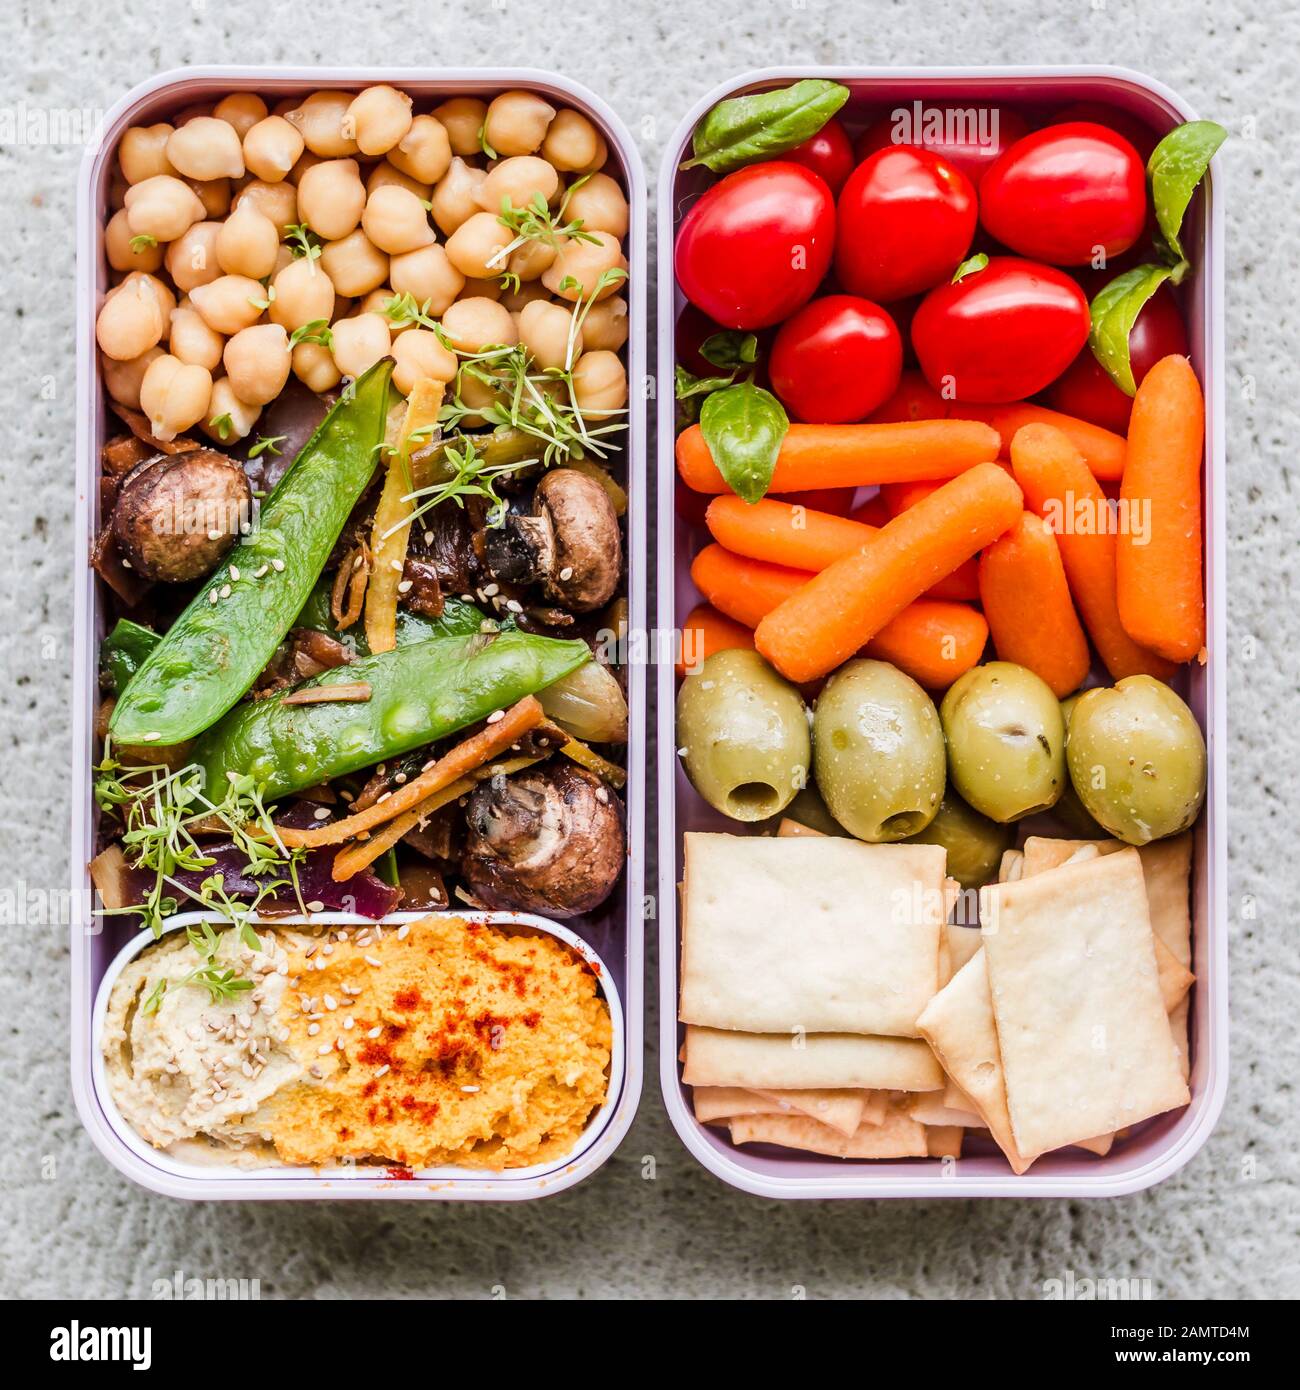 Vegetable and humus lunch boxes Stock Photo